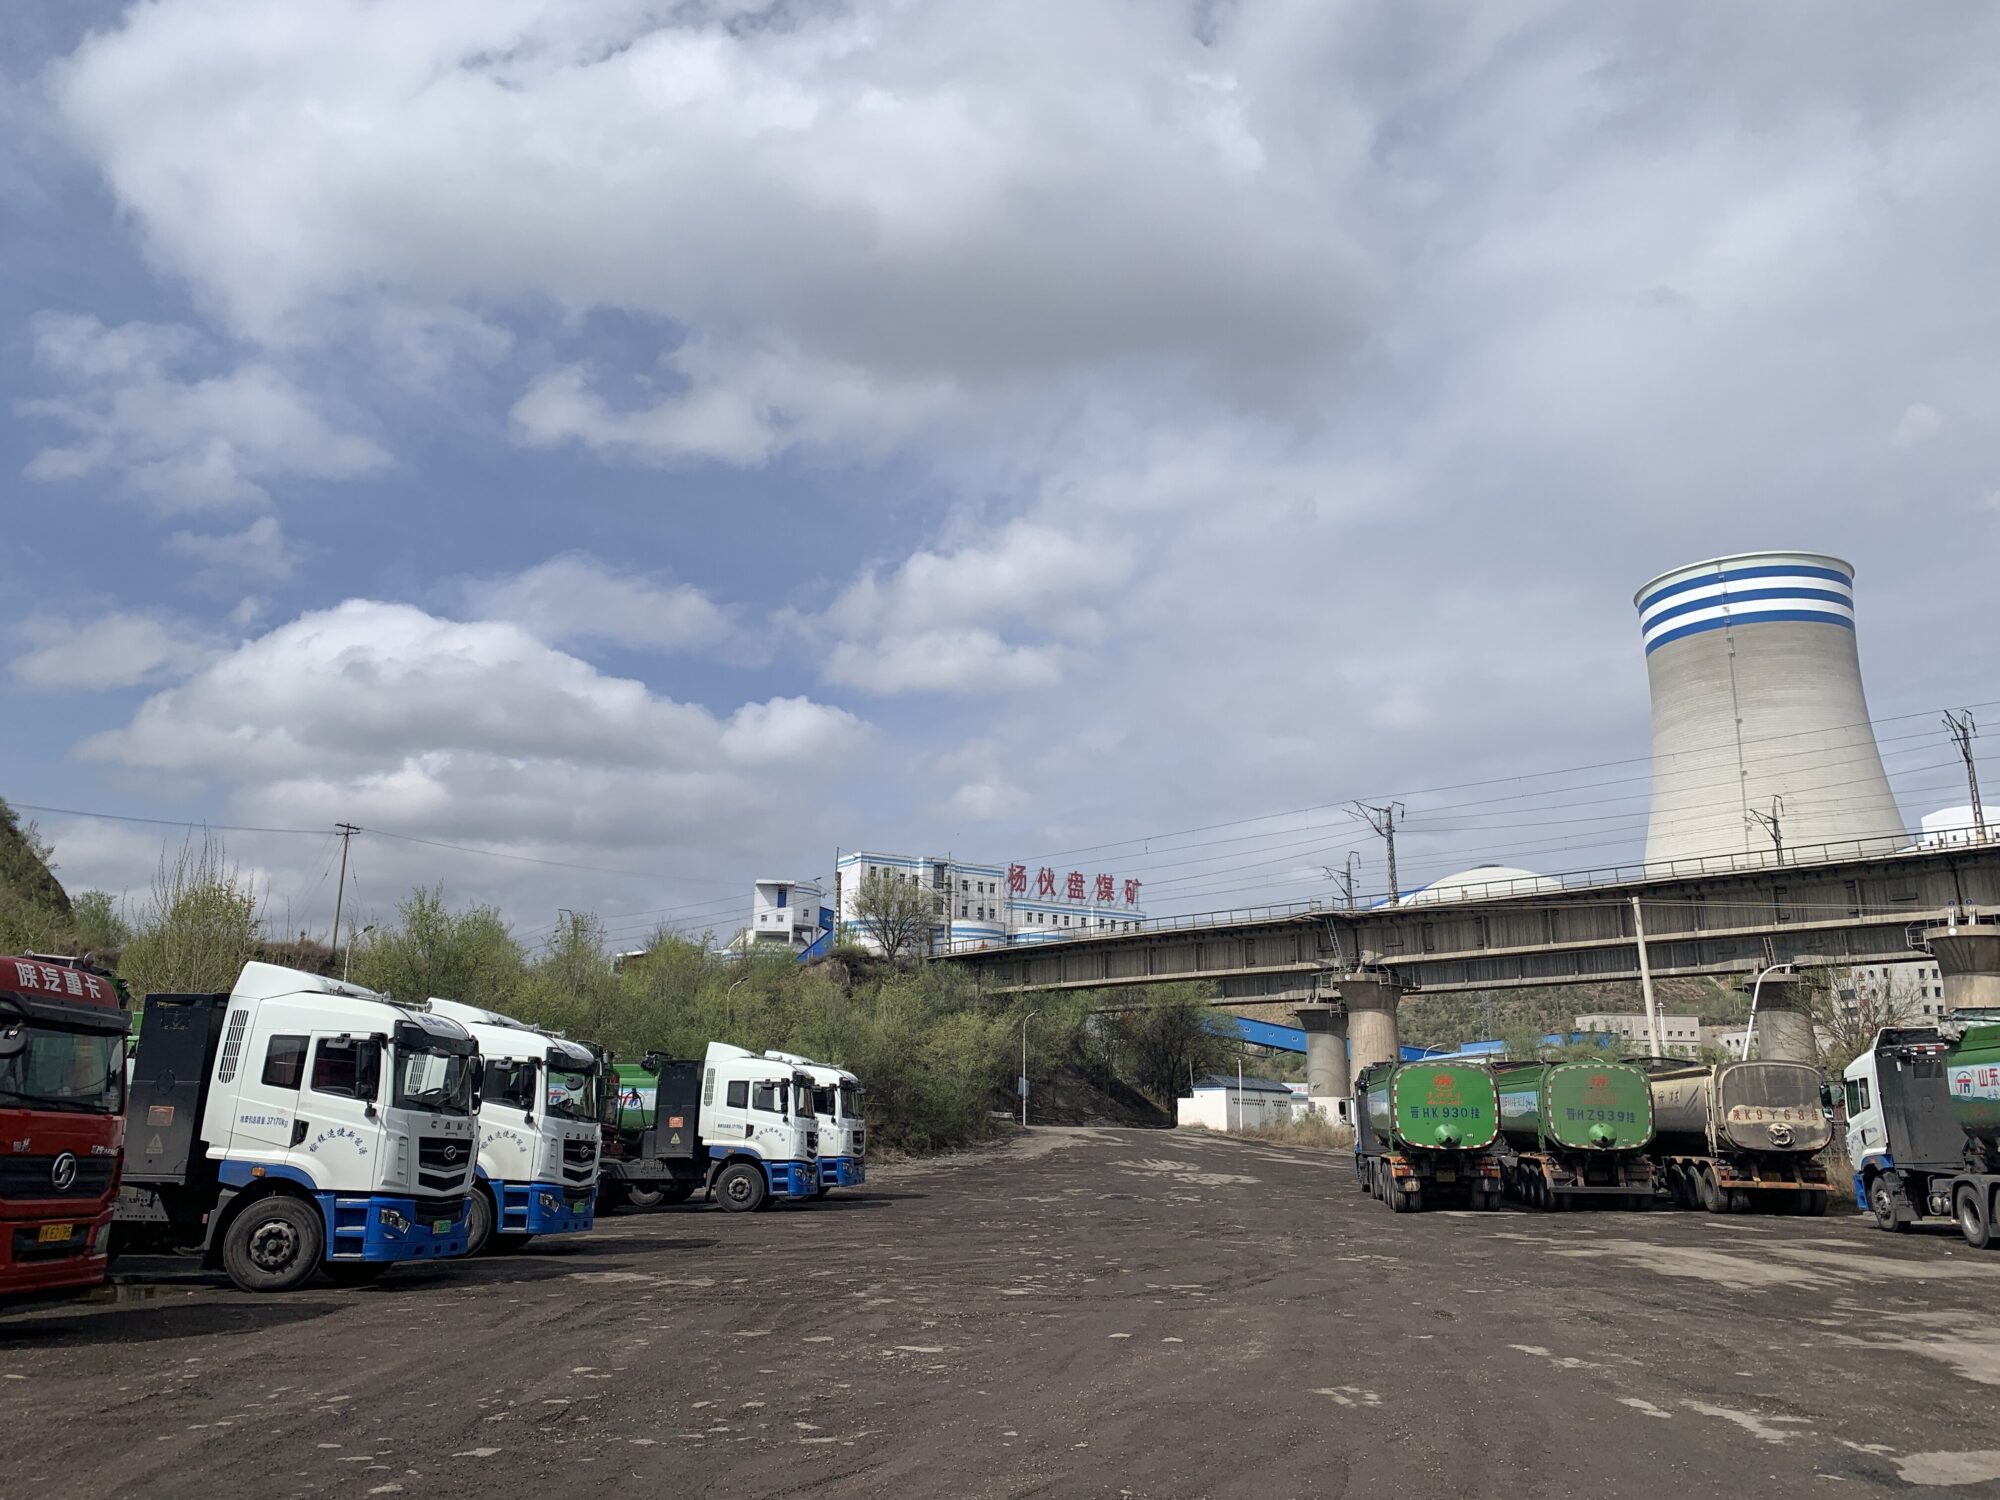 Practical Applications of Zero-Emission Trucks: Case Study of Coal Freight Trucks in Yulin City, Shaanxi Province